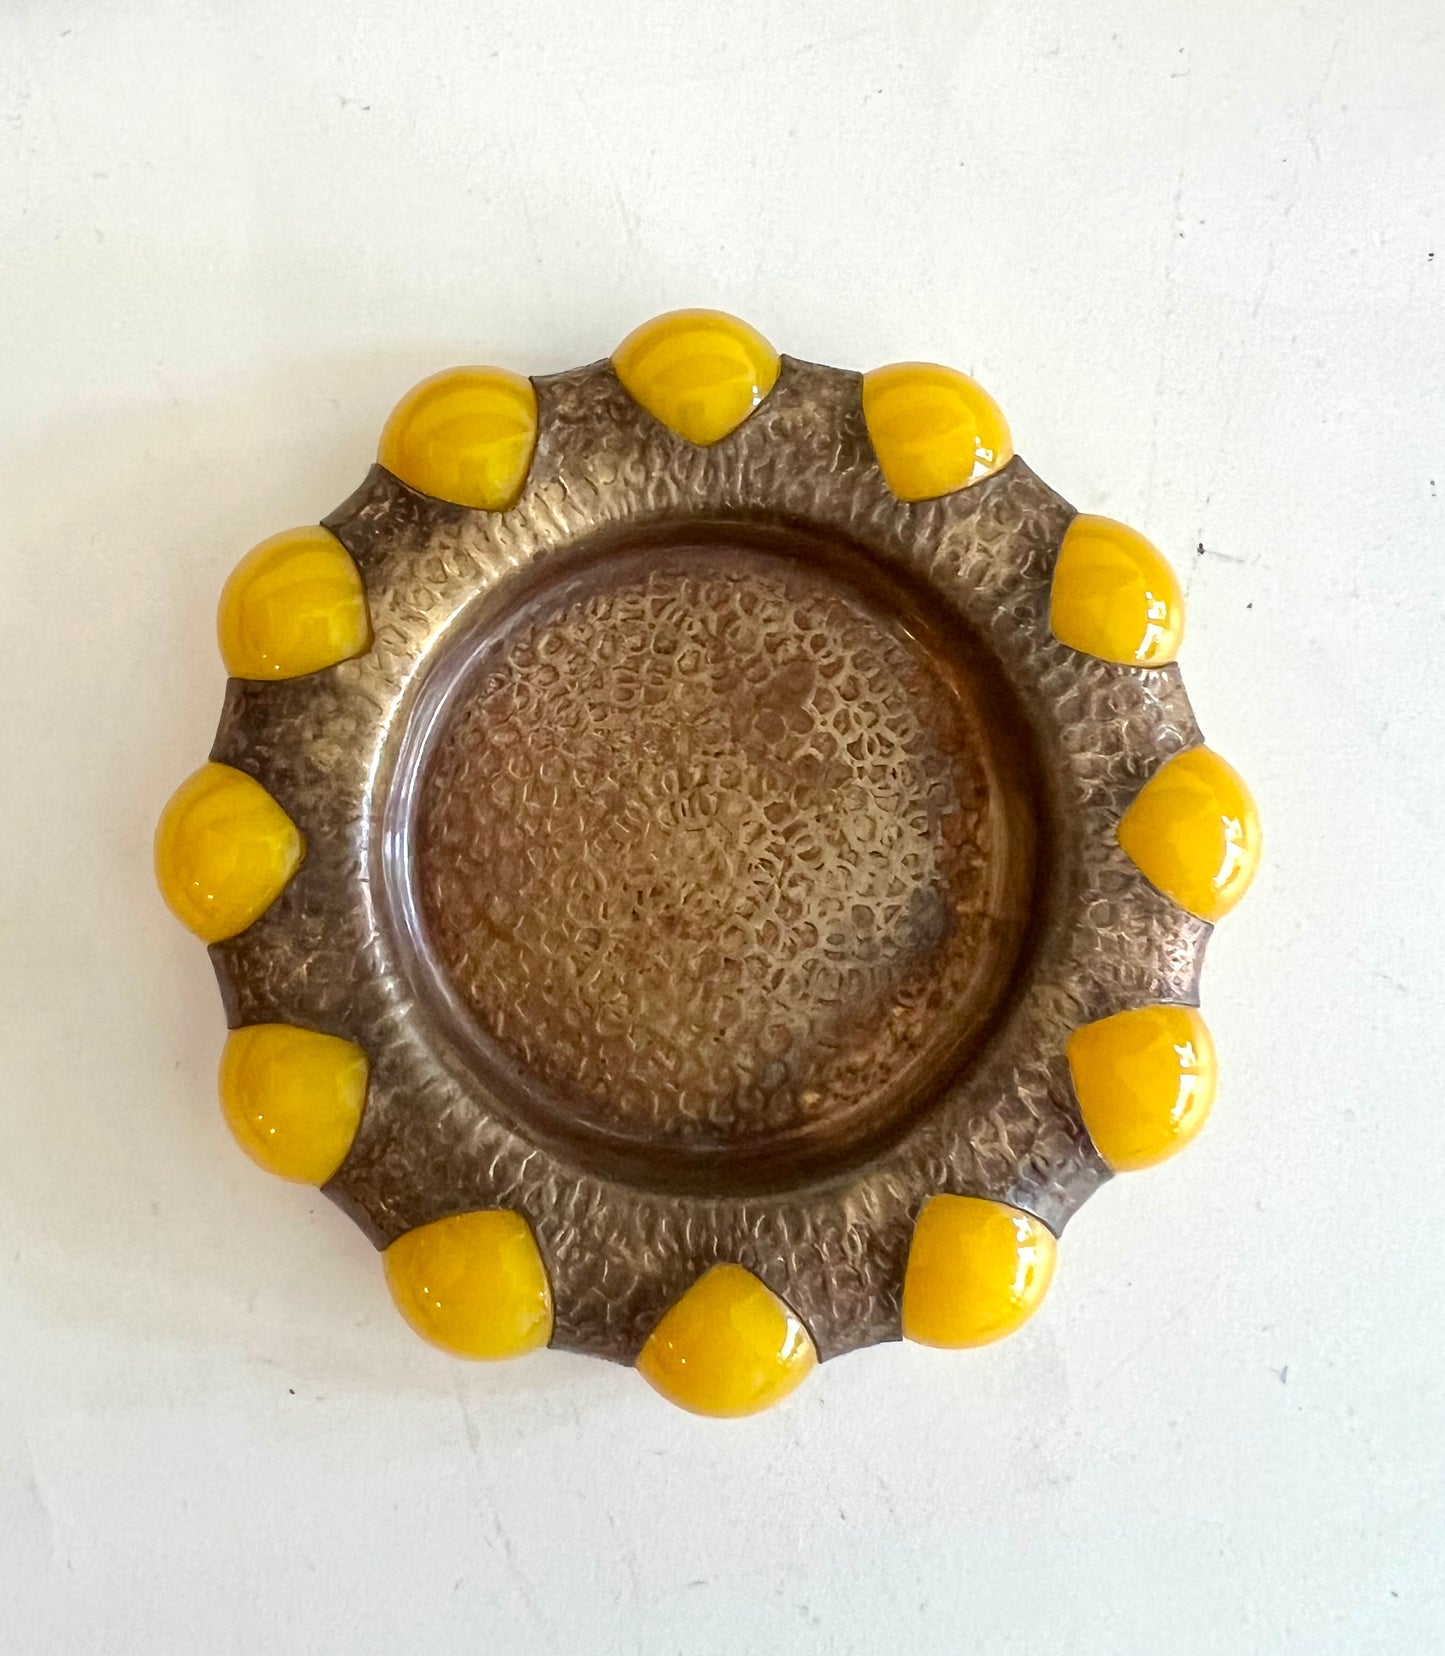 Vintage brass and yellow beads jewel and trinket tray